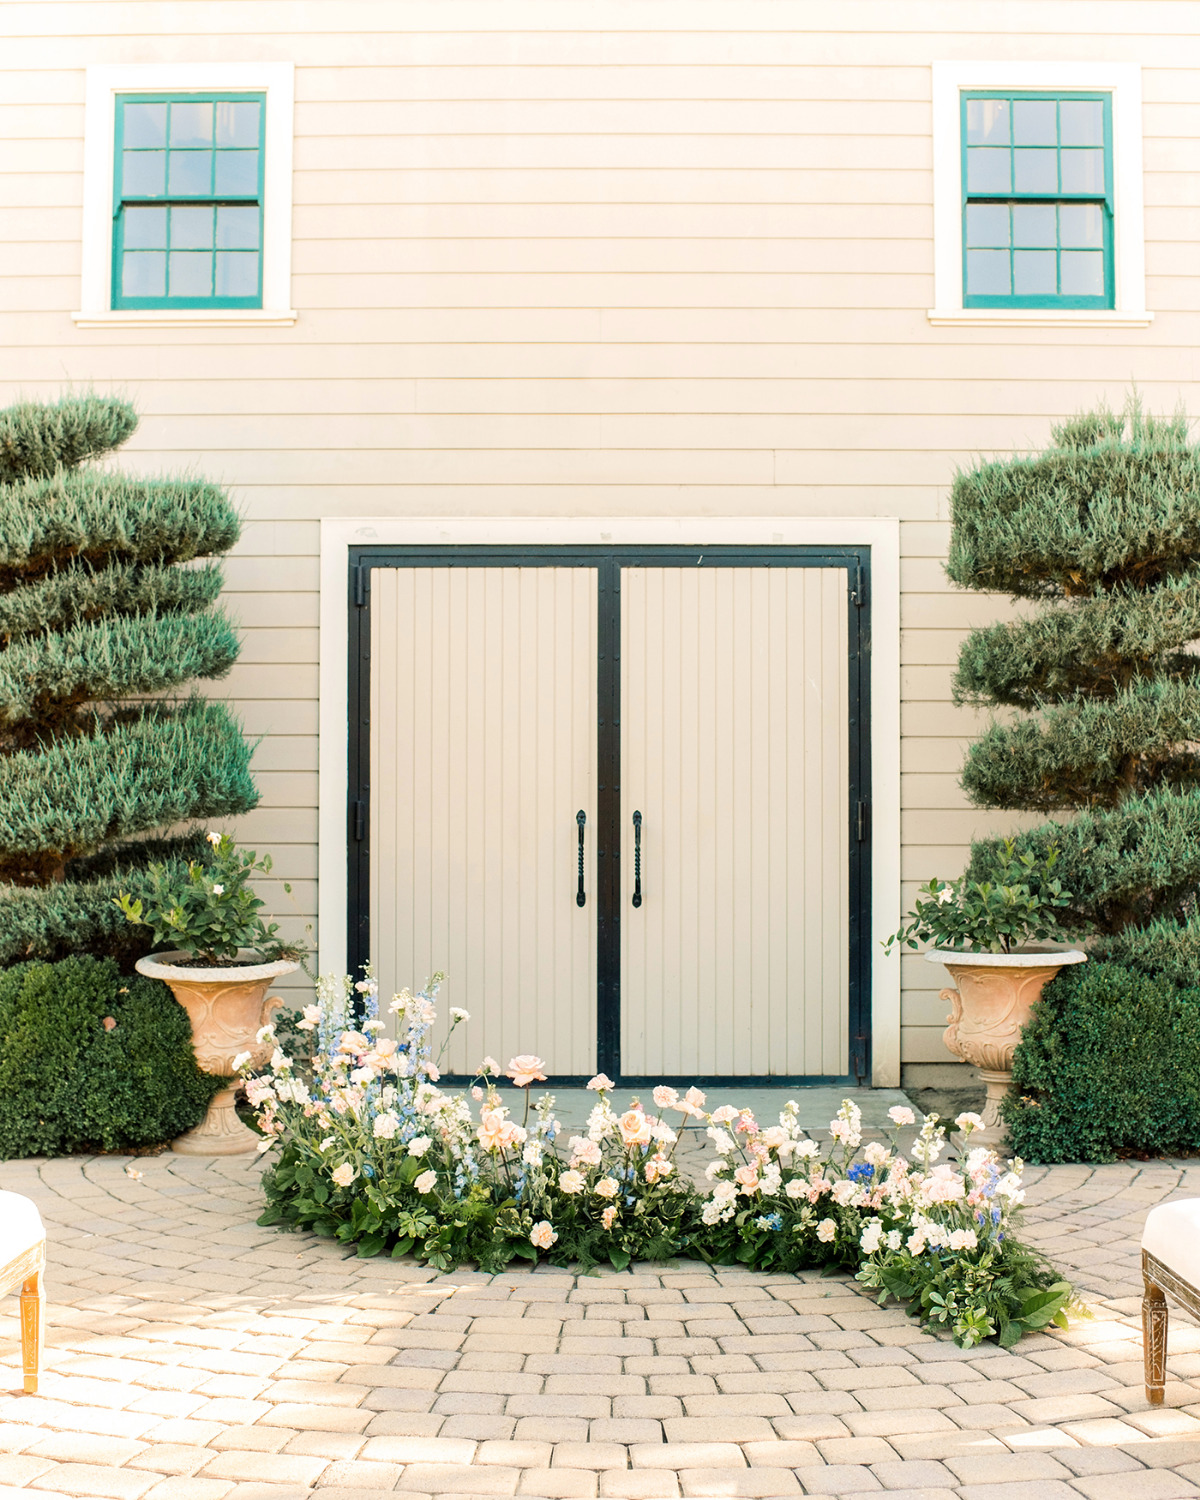 Micro Wedding Inspiration With Soft Neutrals, Exposed Wood, and Bright Pops Of Color